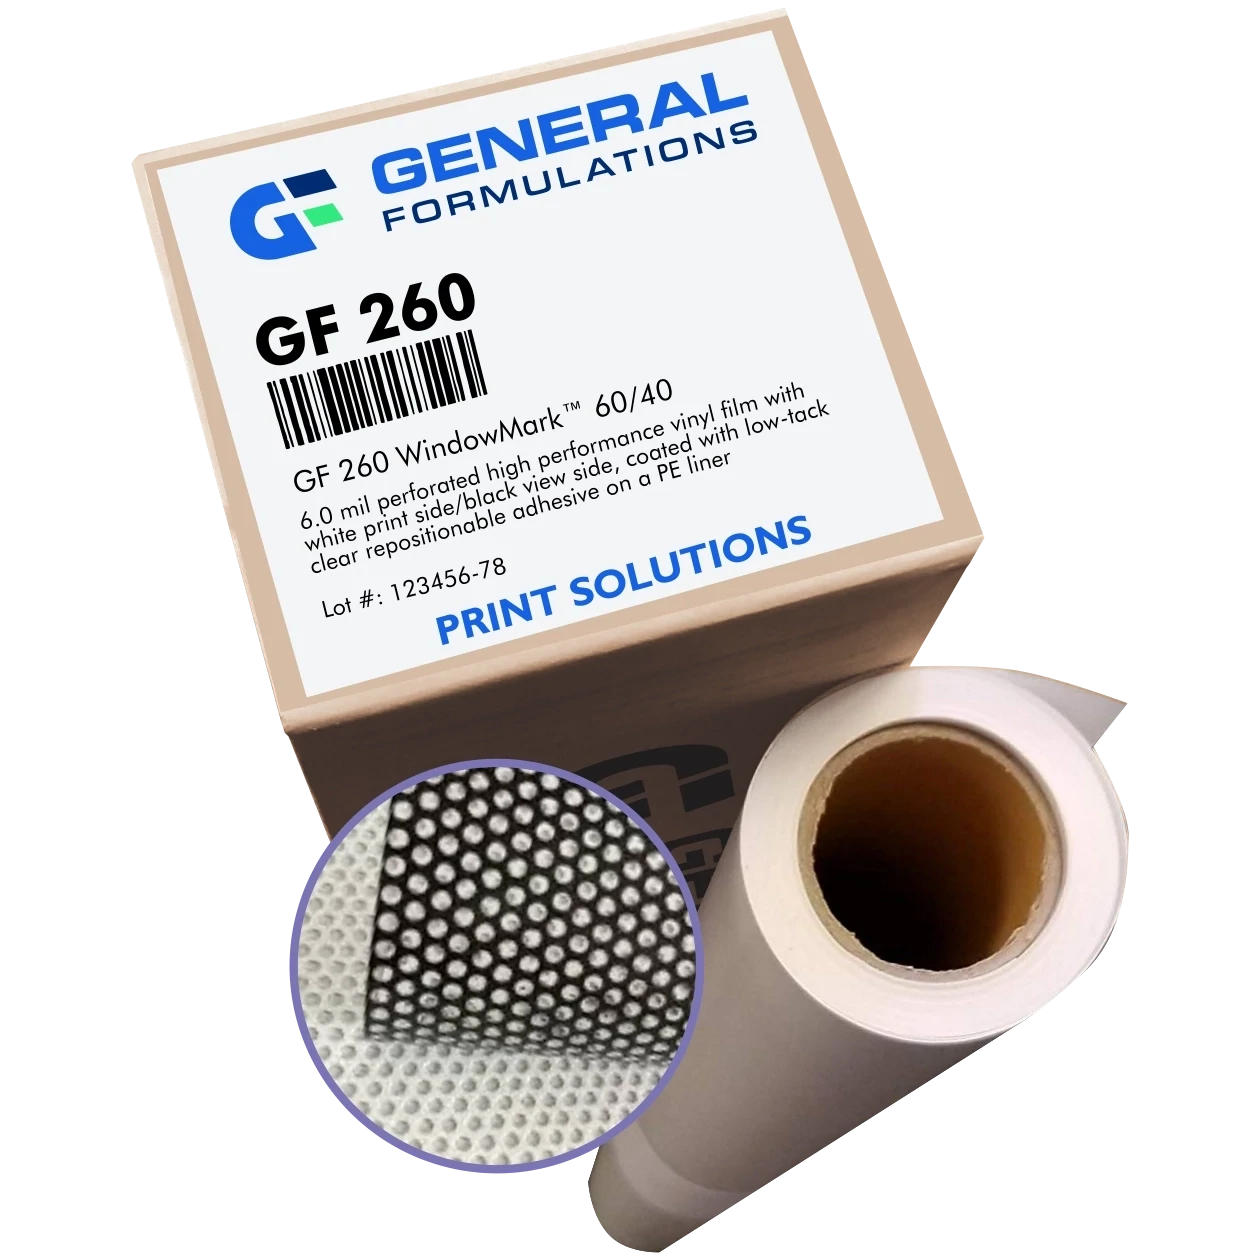 General Formulations 260 WindowMark™ Perforated White/Black Vinyl [60/40] - Removable Repositionable